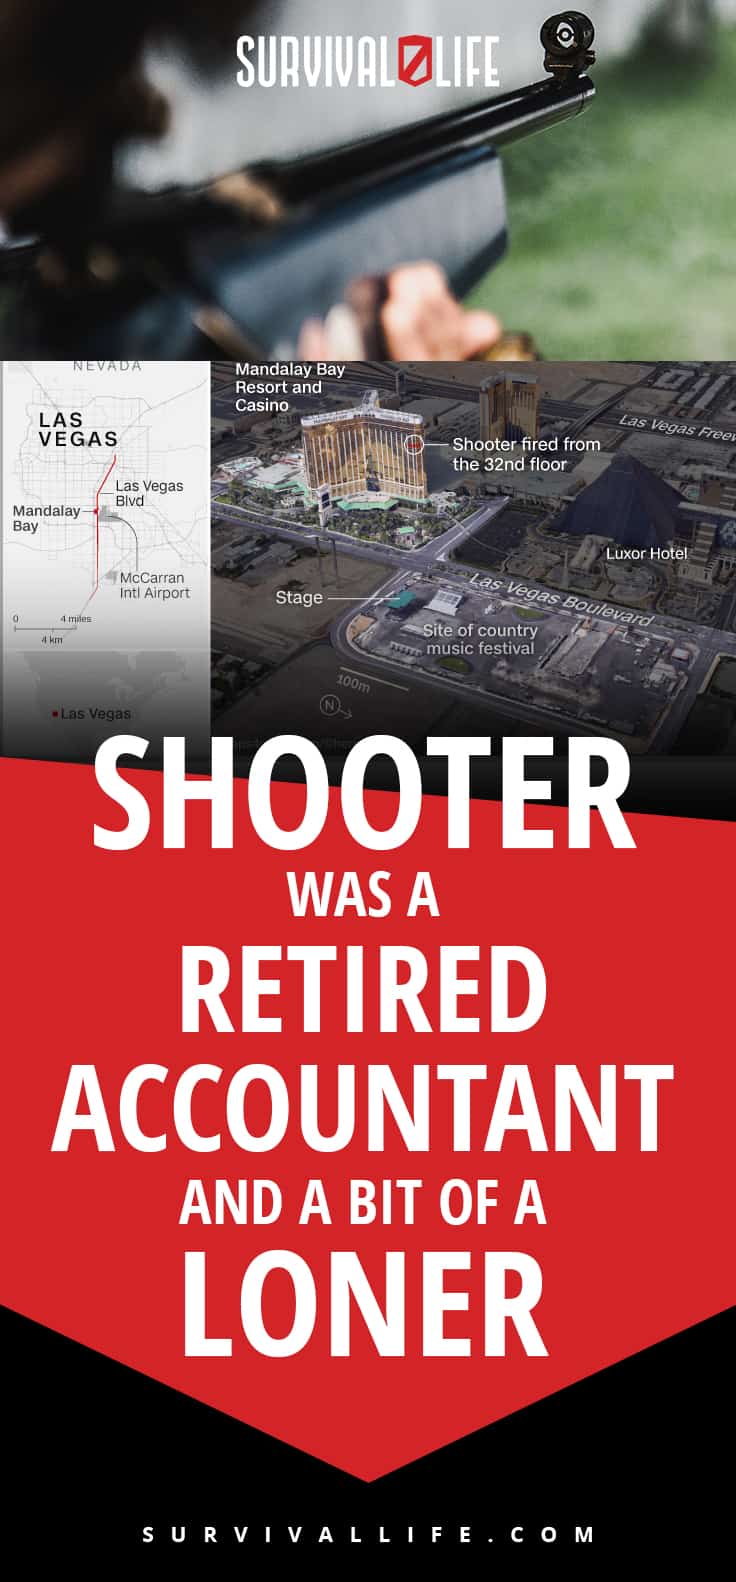 Shooter was a retired accountant and a bit of a loner